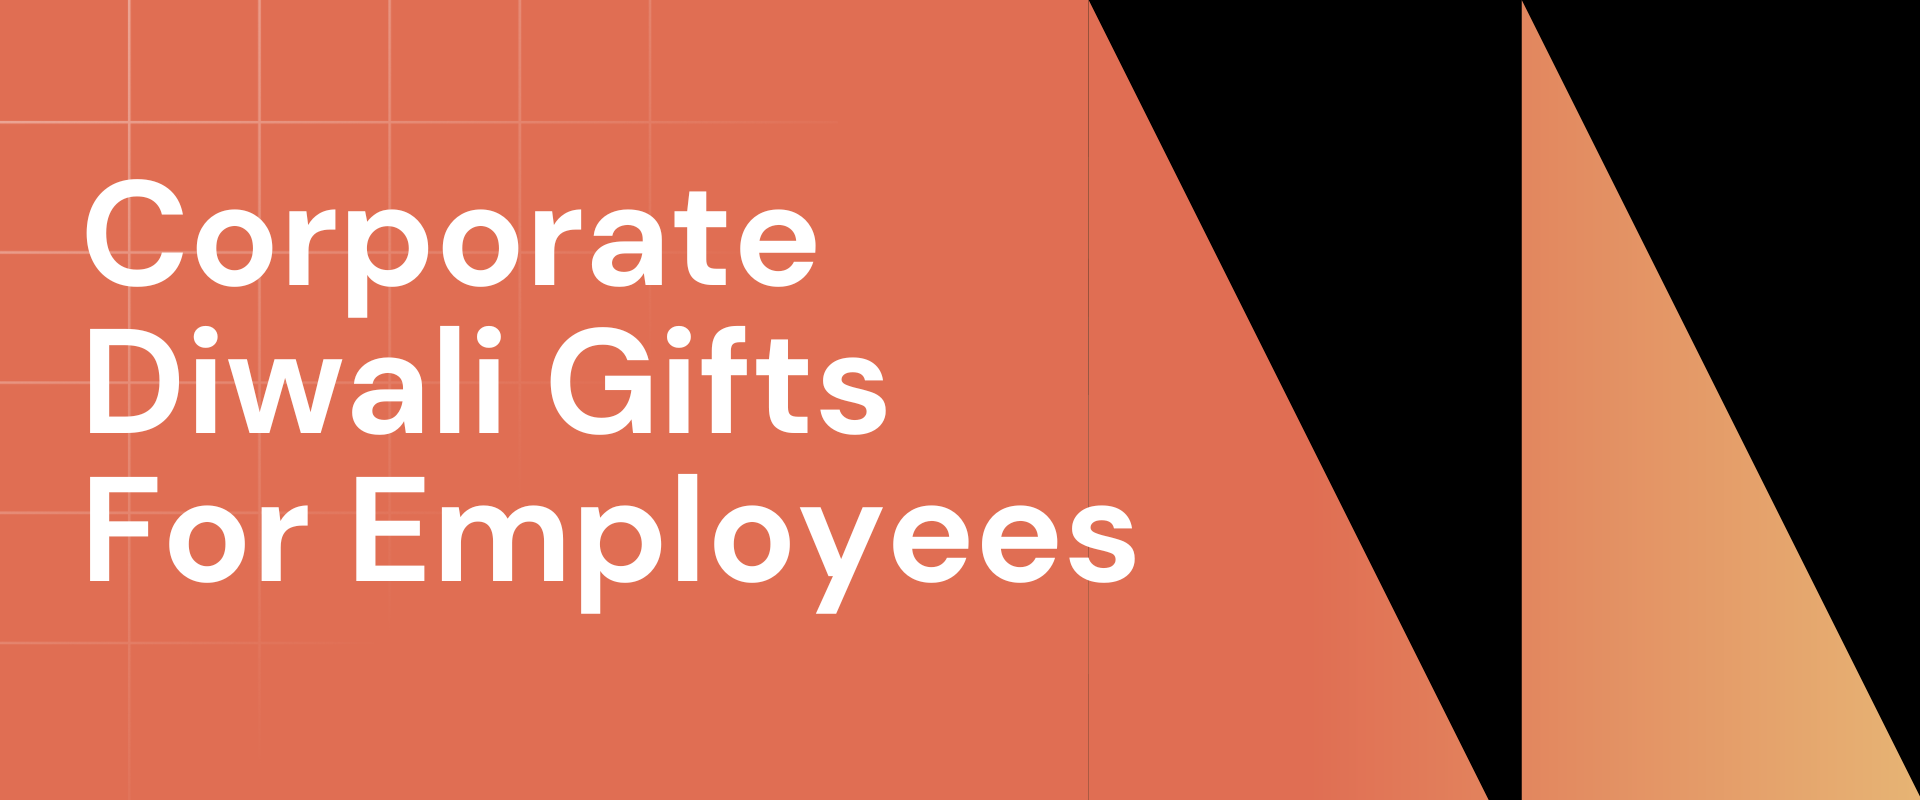 Corporate Diwali gifts for Employees